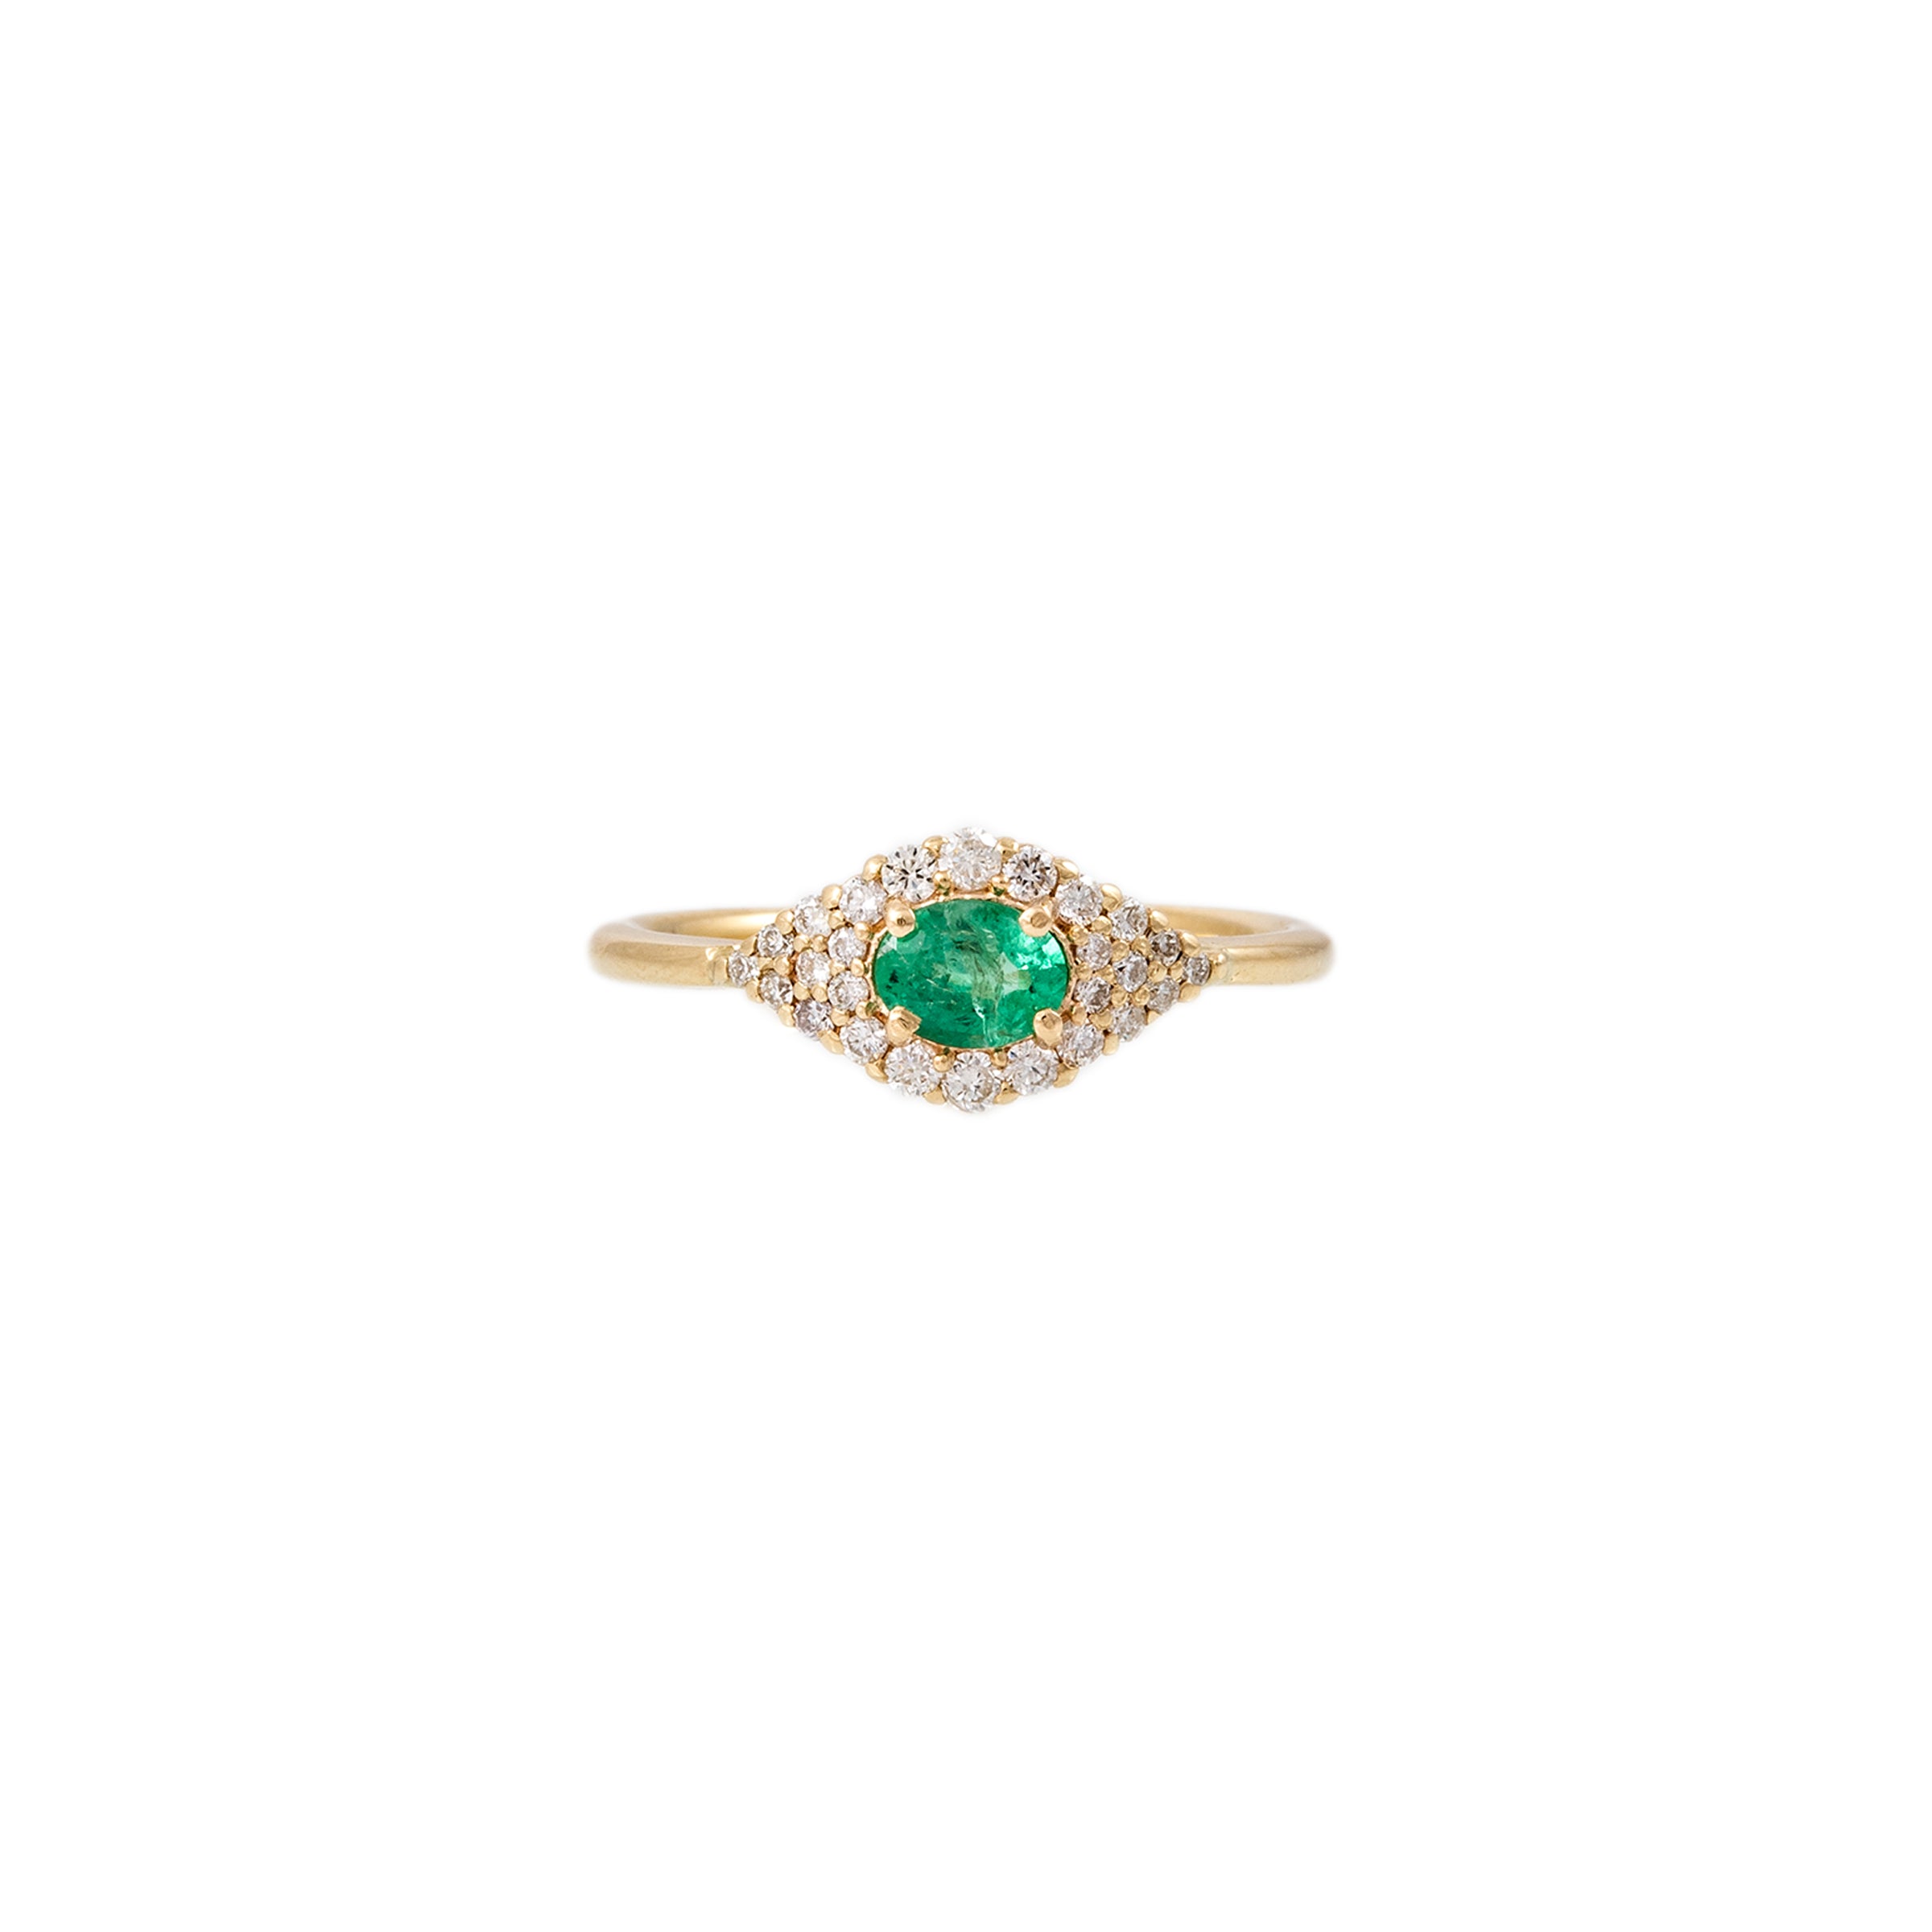 SMALL PAVE EMERALD CENTER EYE RING